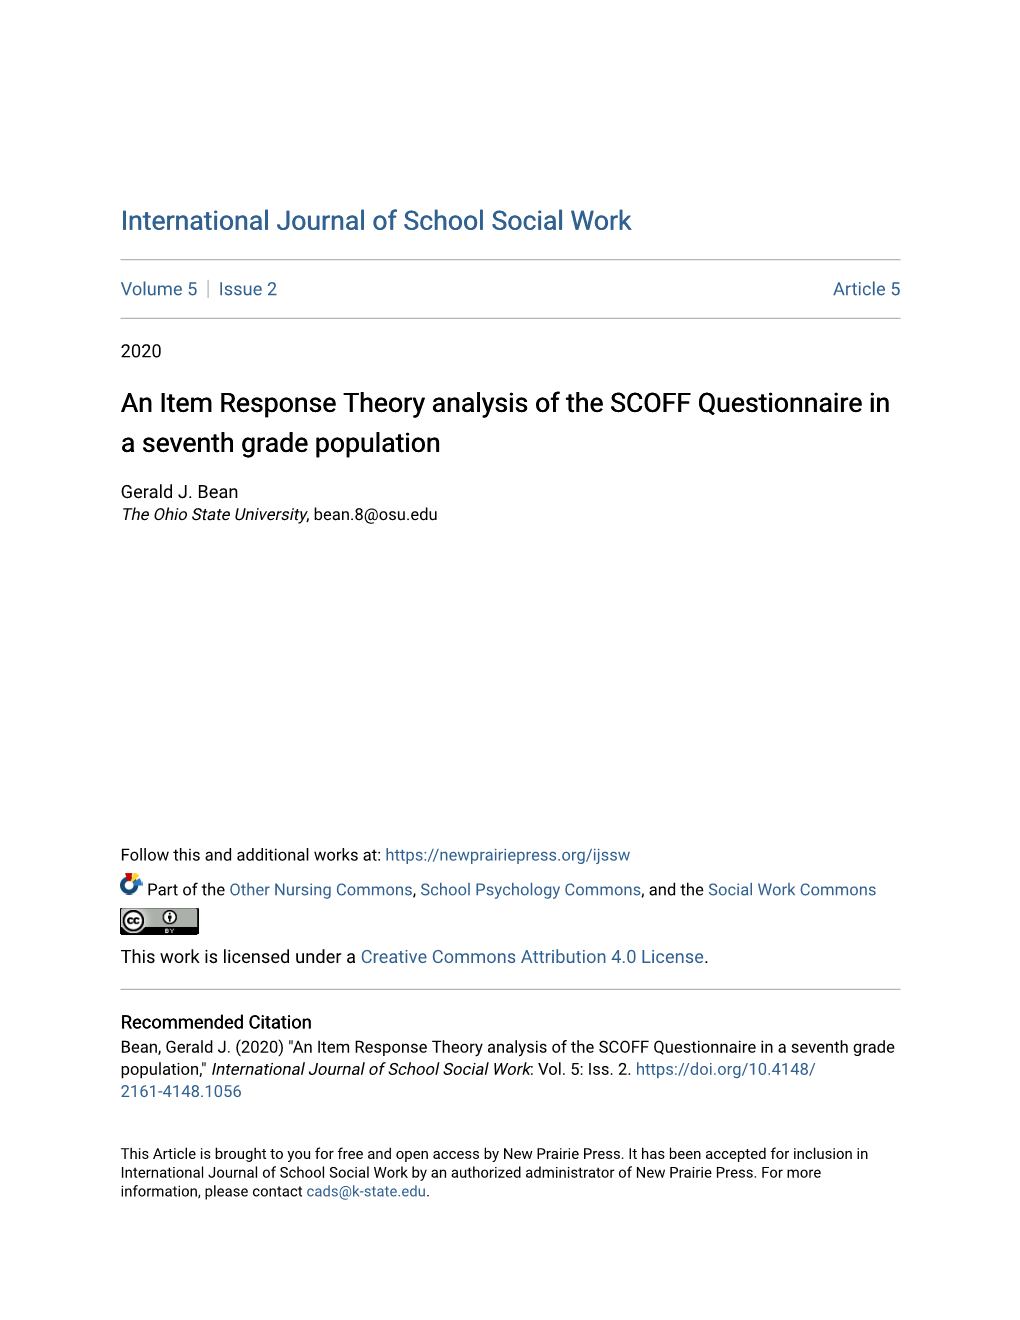 An Item Response Theory Analysis of the SCOFF Questionnaire in a Seventh Grade Population